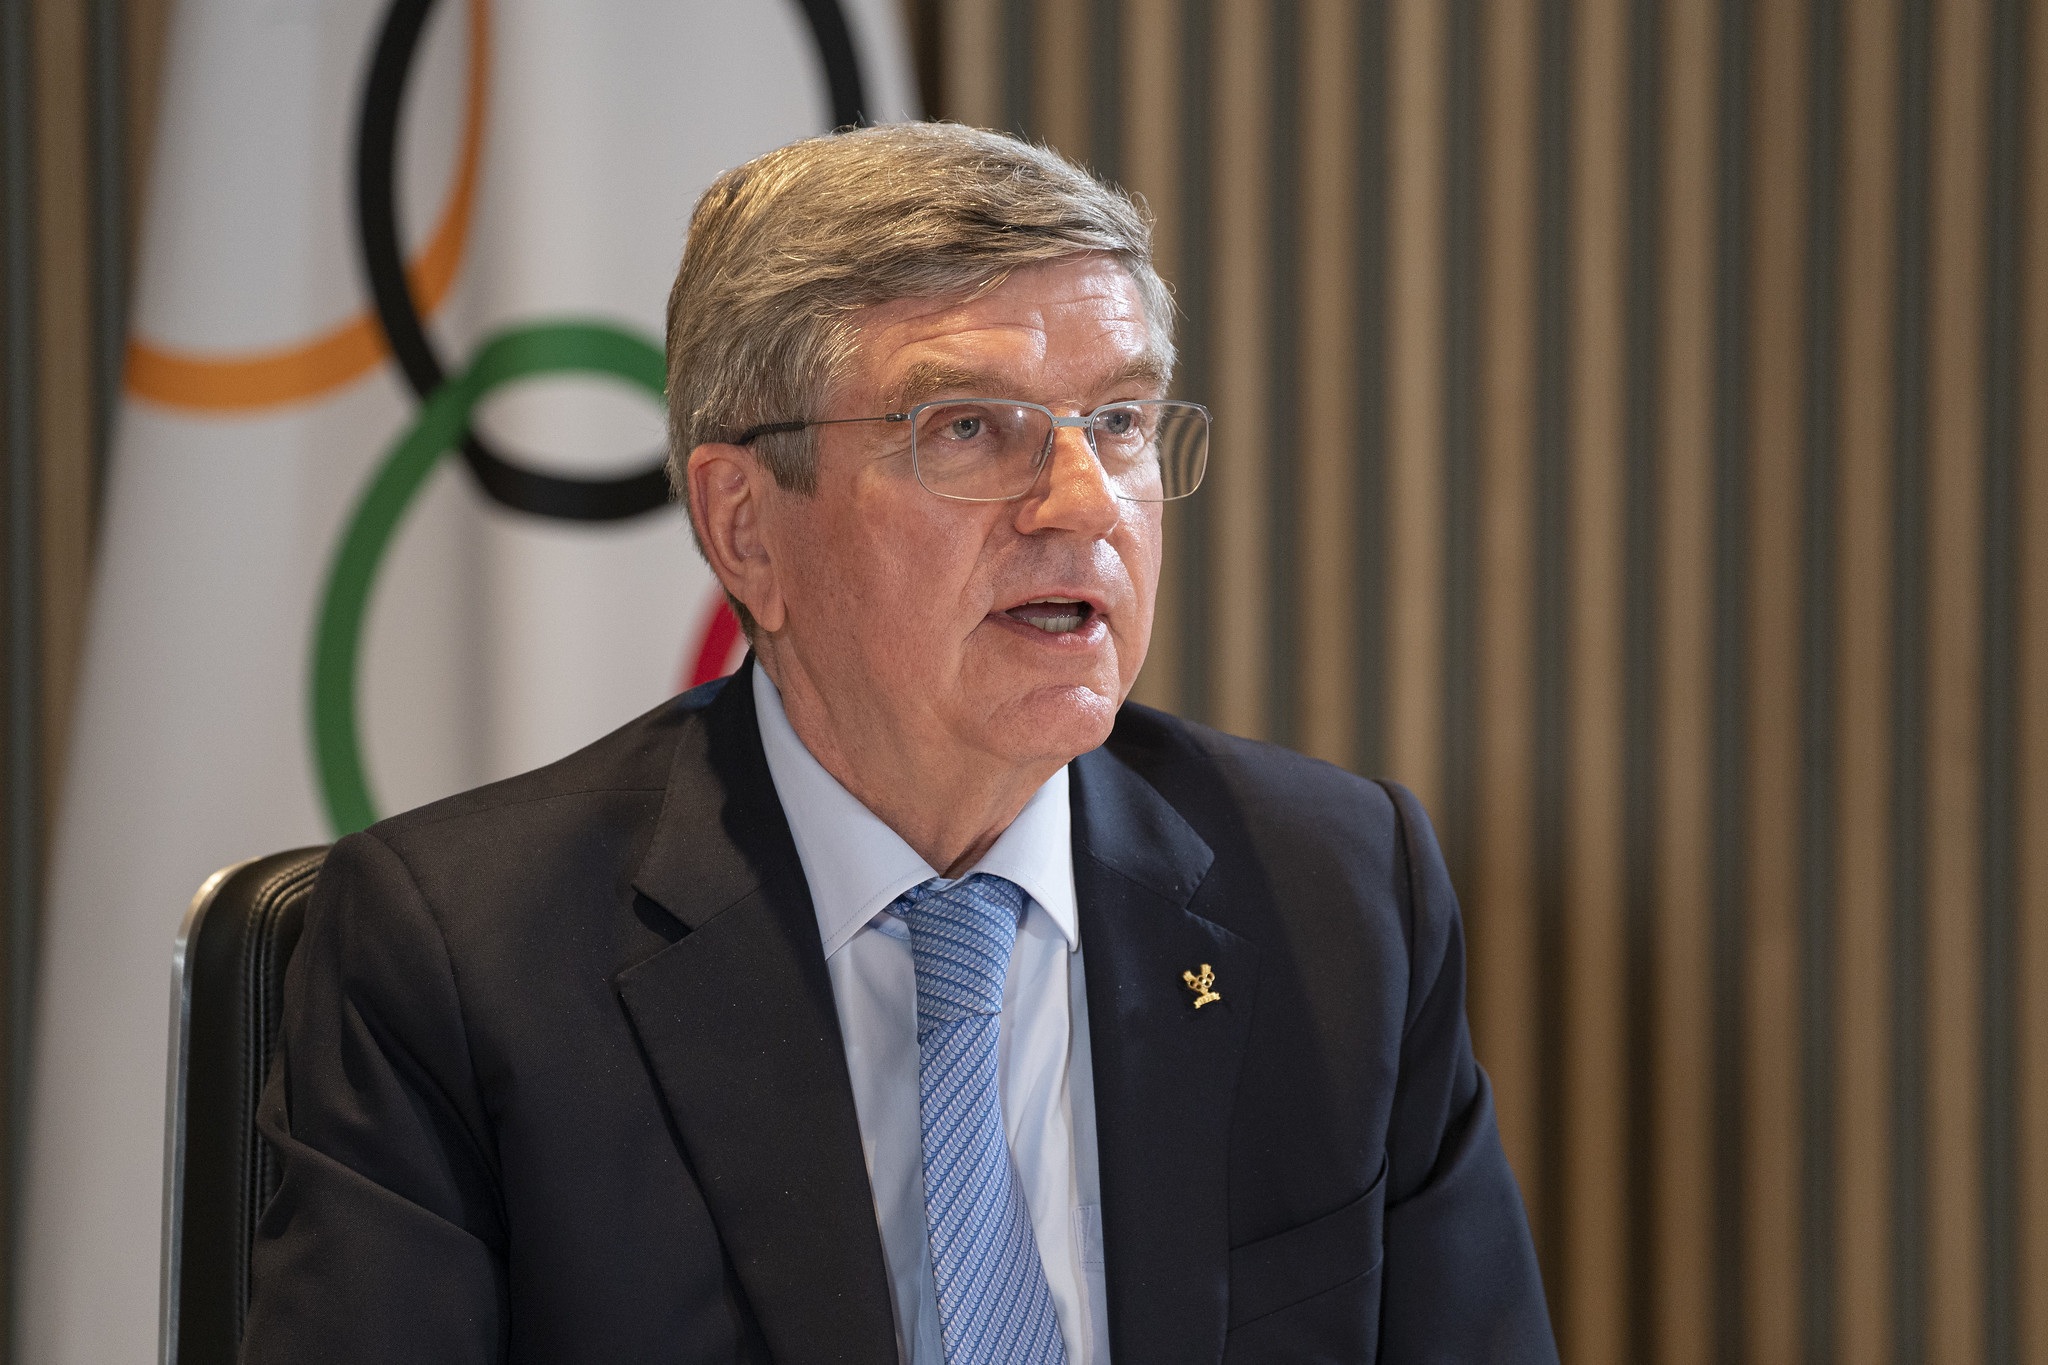 The German will be re-elected for his second and final term at the virtual IOC Session this week ©IOC